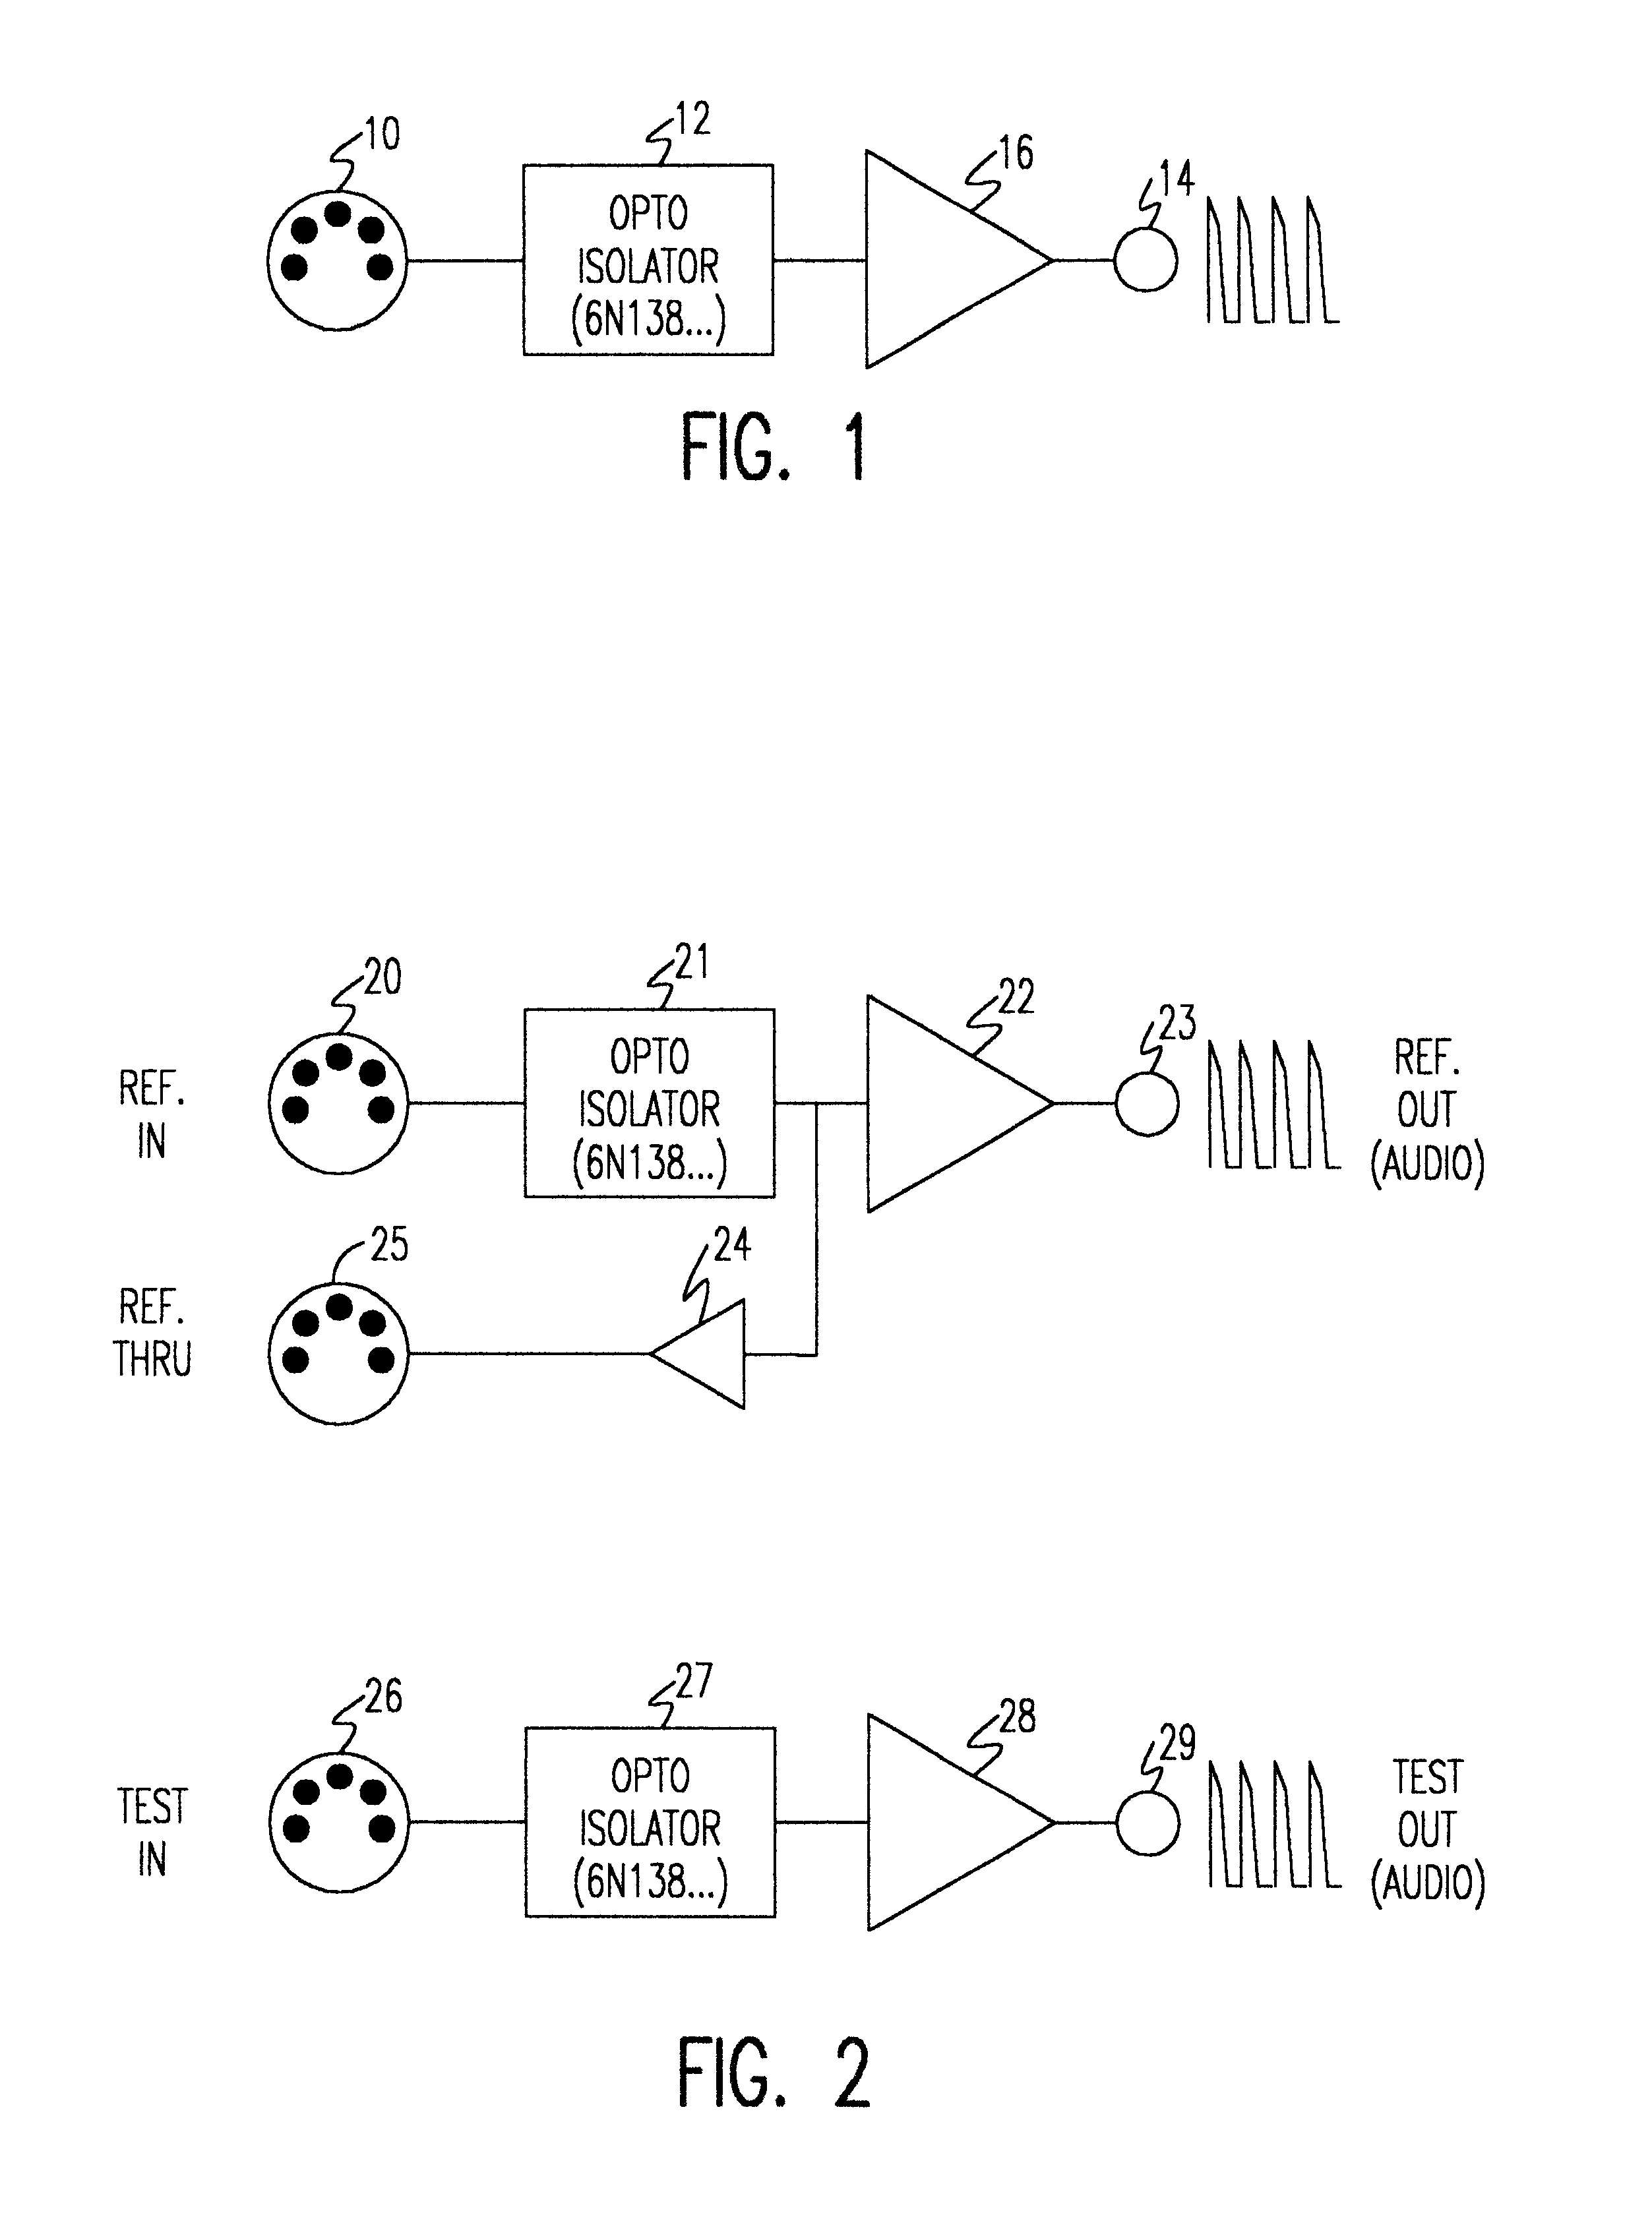 Method and apparatus for measuring timing characteristics of message-oriented transports